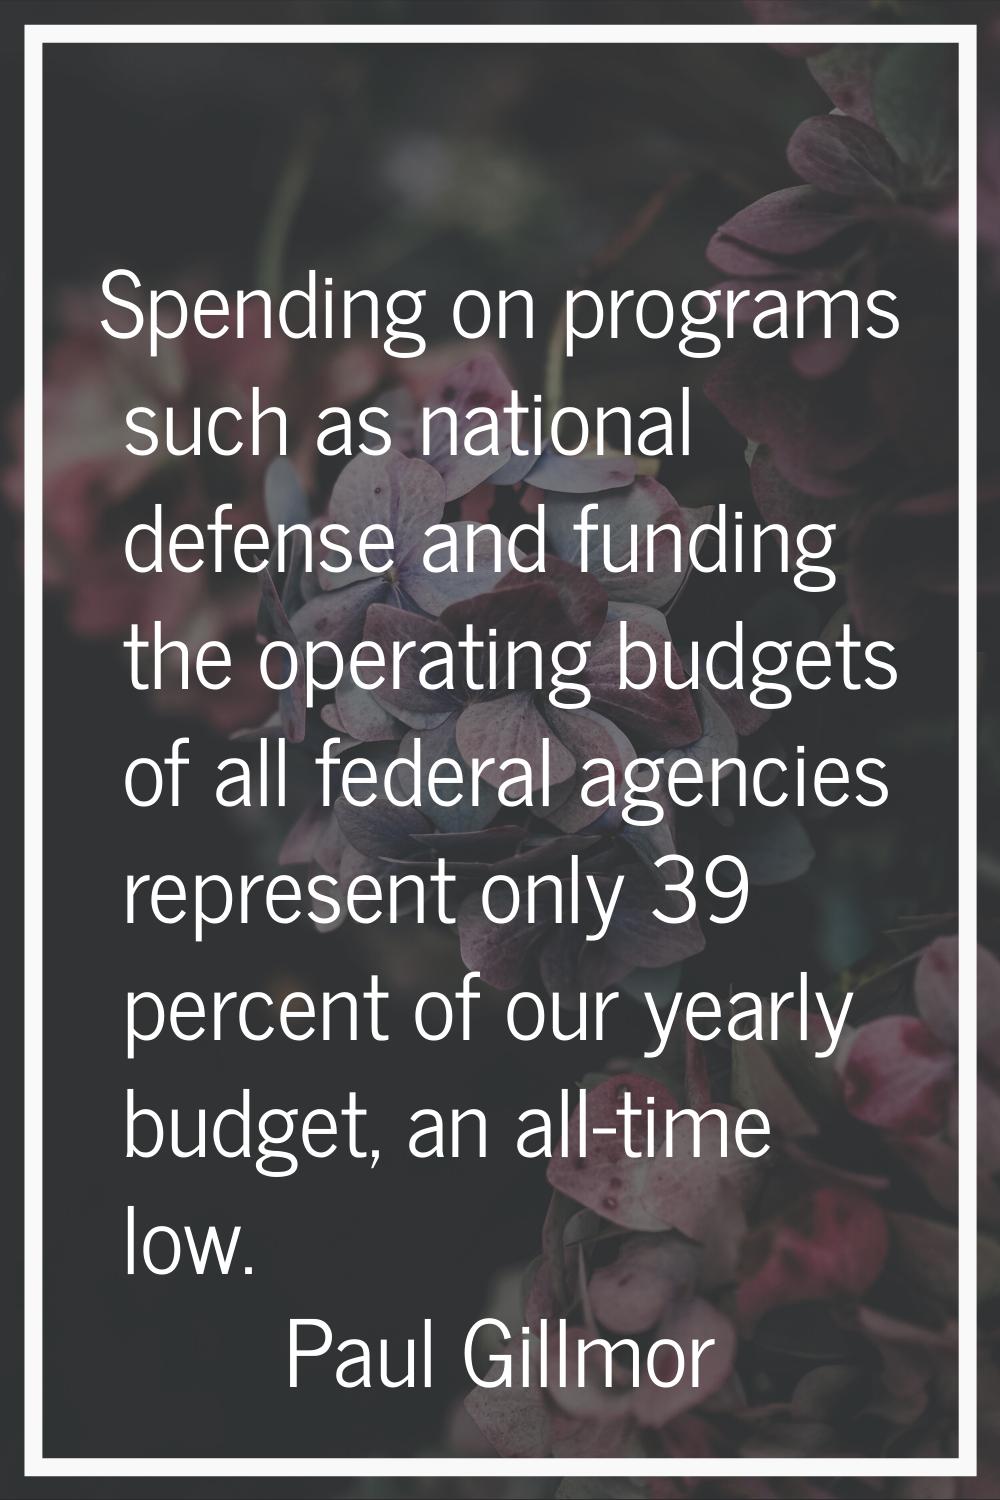 Spending on programs such as national defense and funding the operating budgets of all federal agen